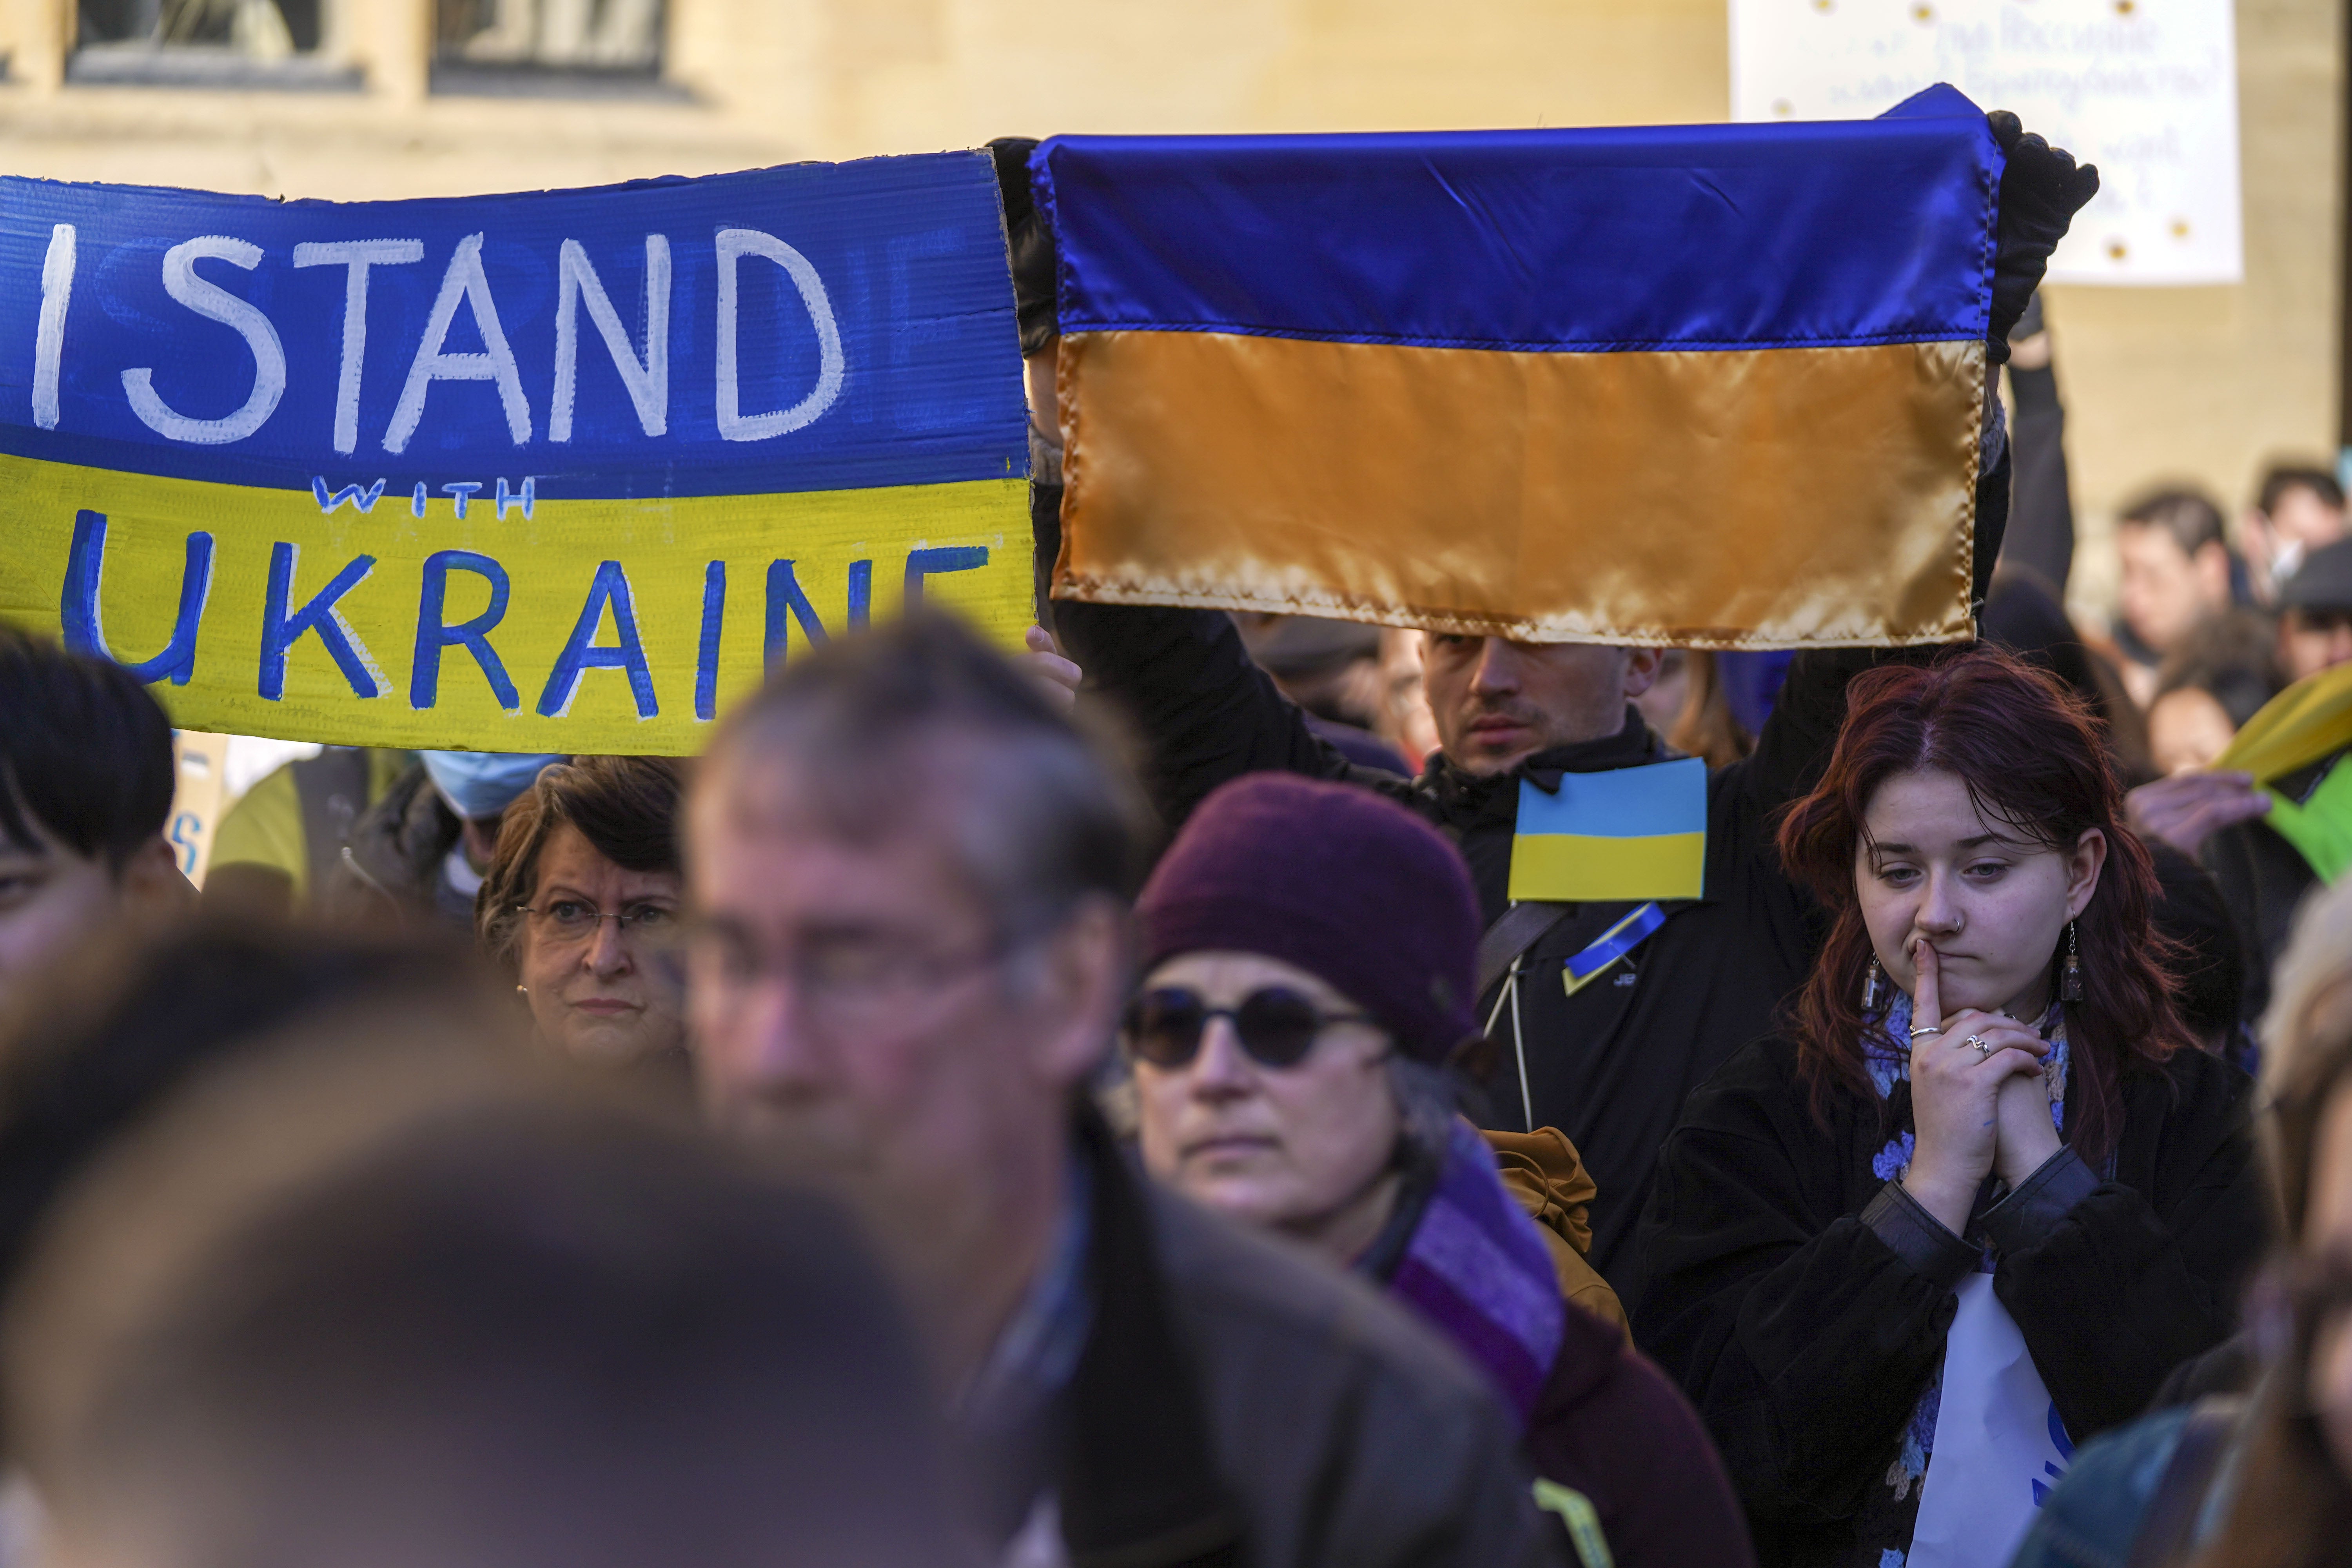 Ireland planning for potential arrival of 200,000 Ukrainian refugees ...